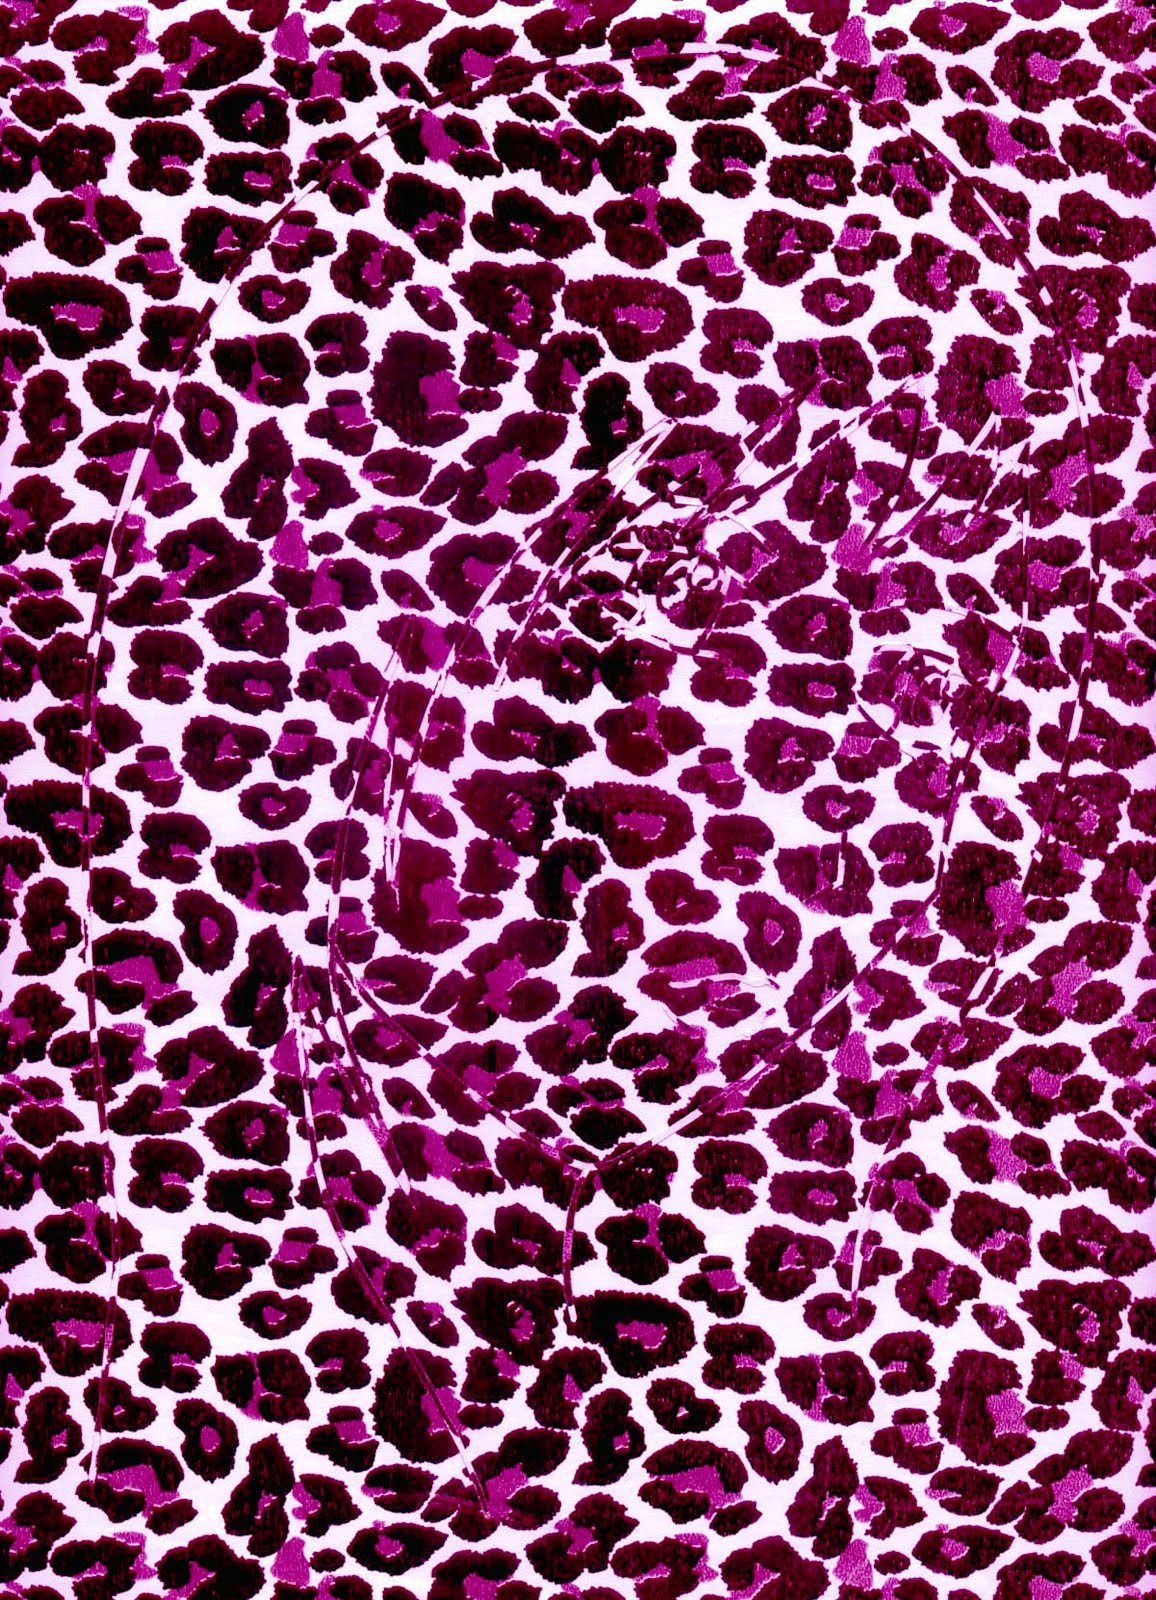 Leopard Print Pink And Black